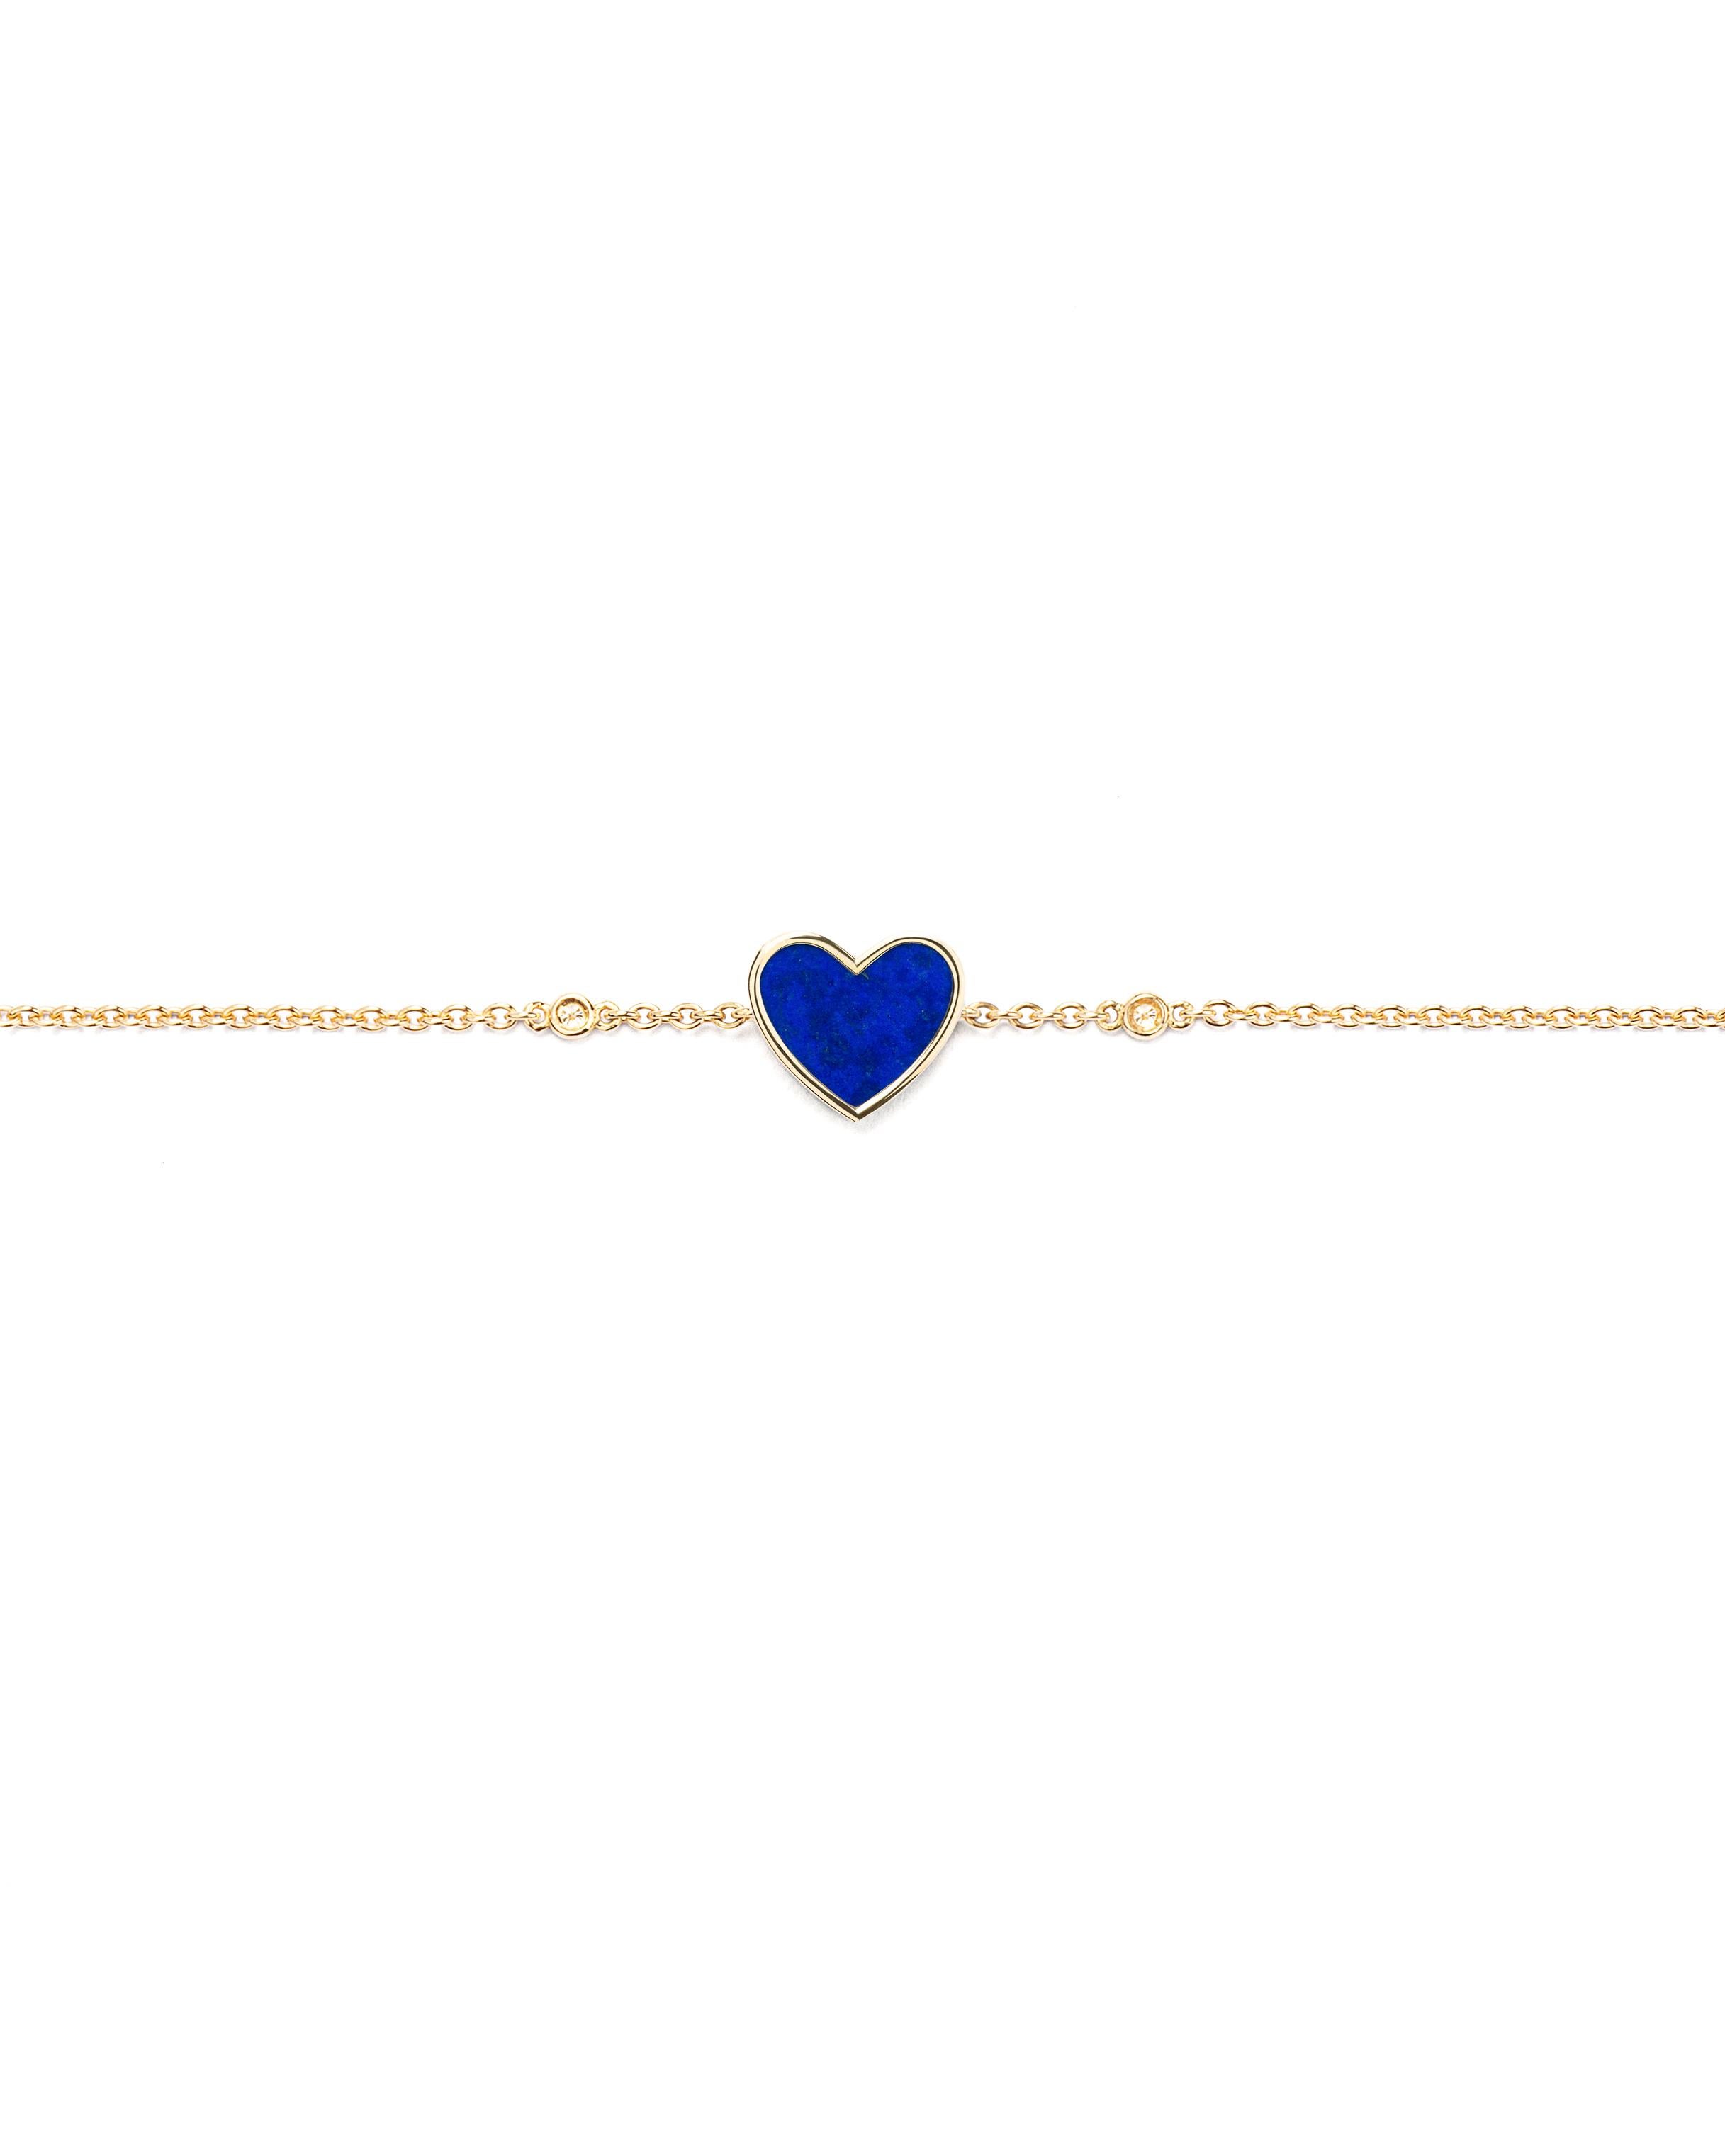 L'Attrape-Coeur collection plays with the colors of love. Its rounded gold borders embrace the purity of diamonds, the nuances of opal, turquoise or lapis lazuli.

L'Attrape Coeur bracelet in yellow gold with lapis lazuli.

Gold weight : 2.3